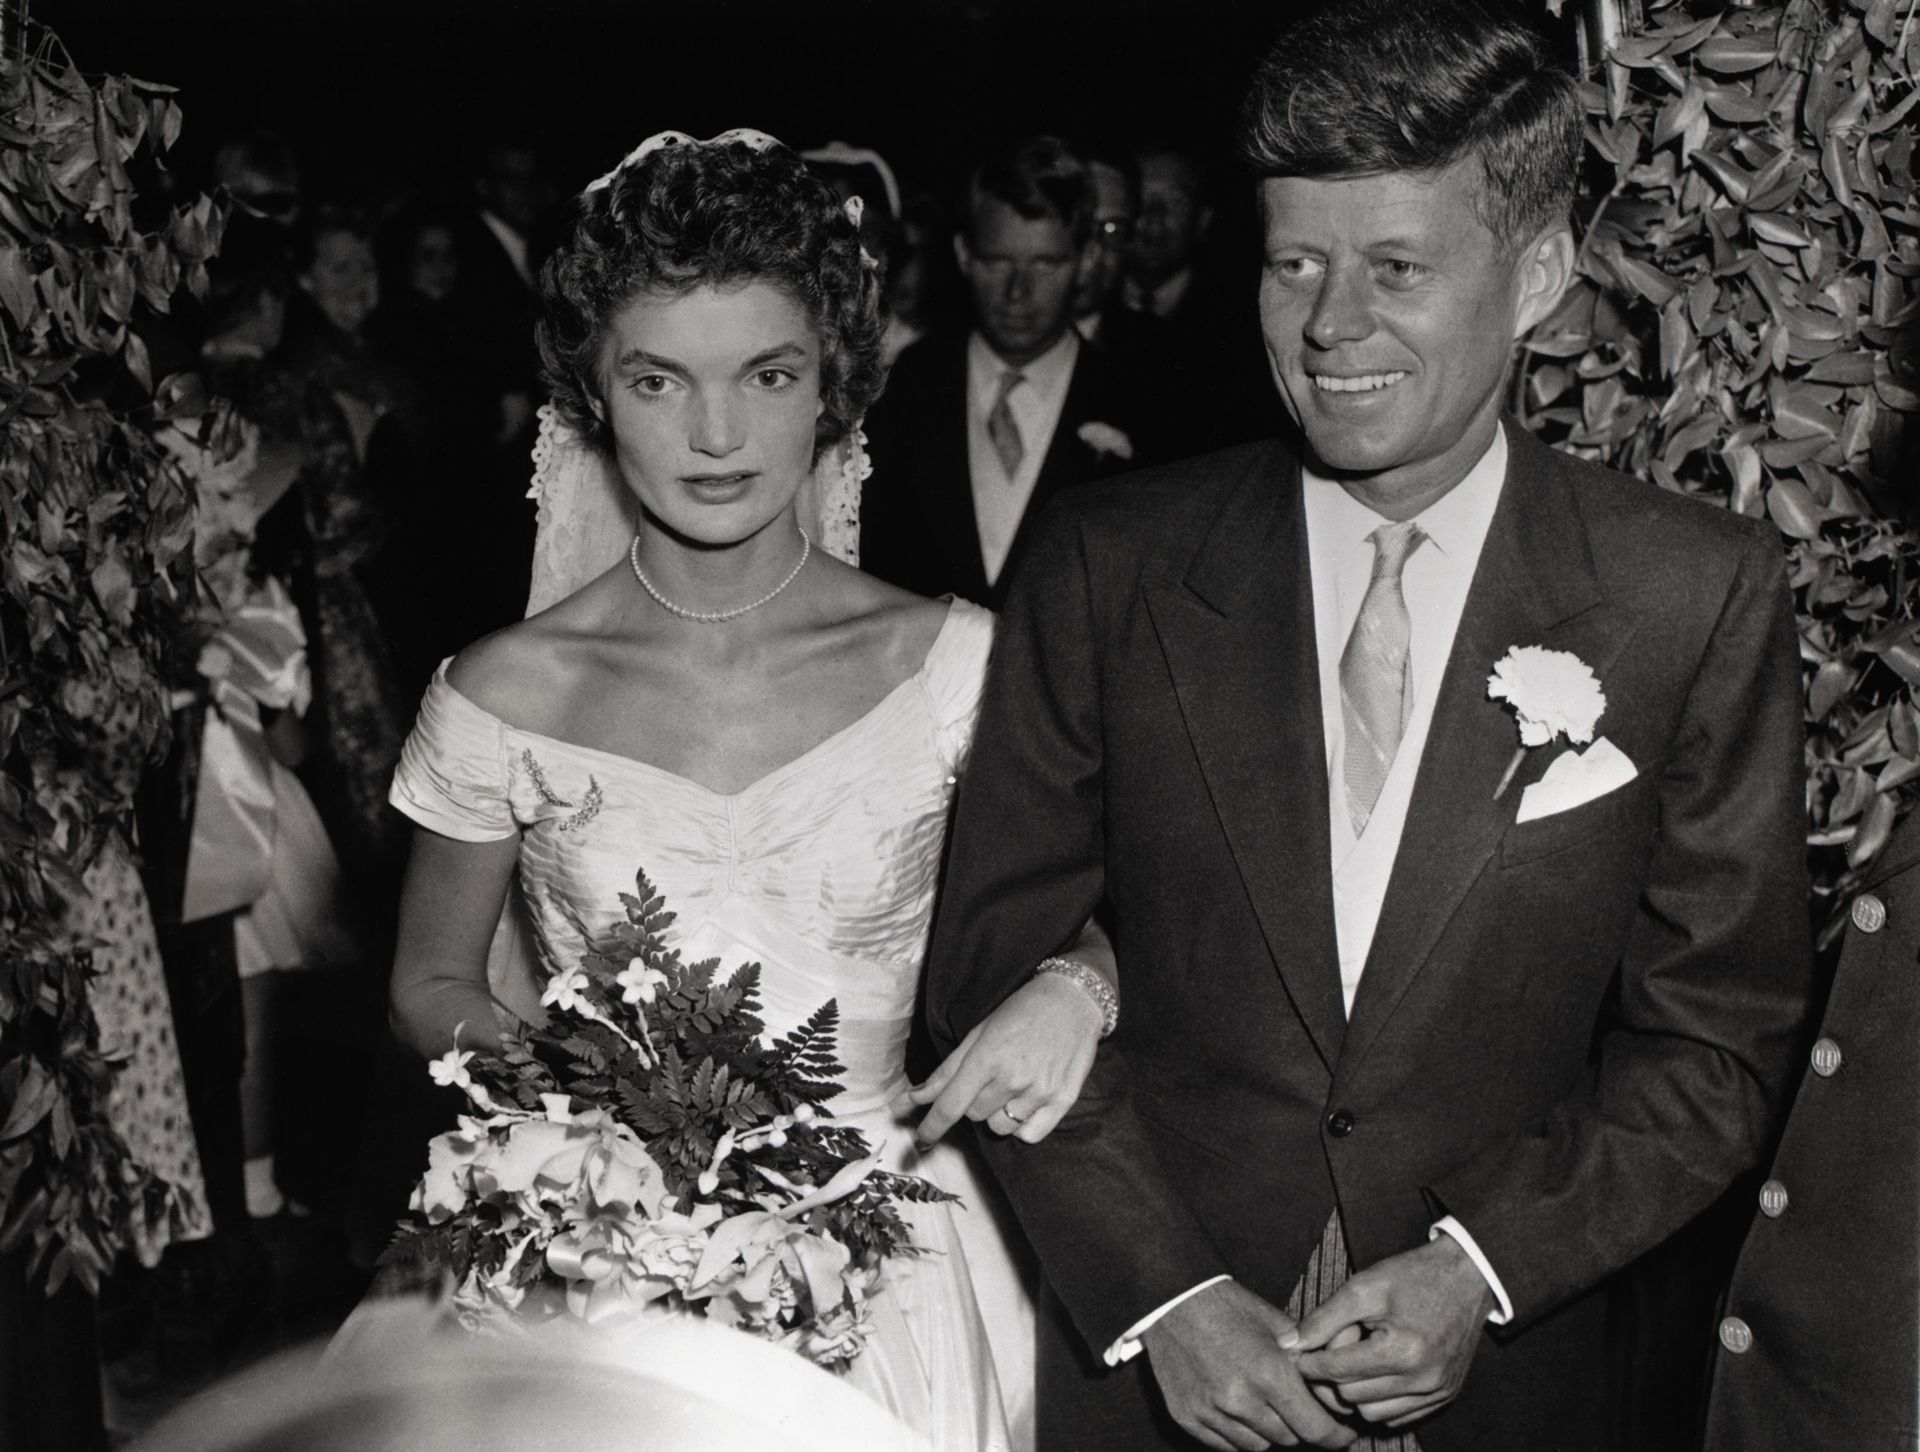 Mr. and Mrs. John F. Kennedy Walking Arm in Arm